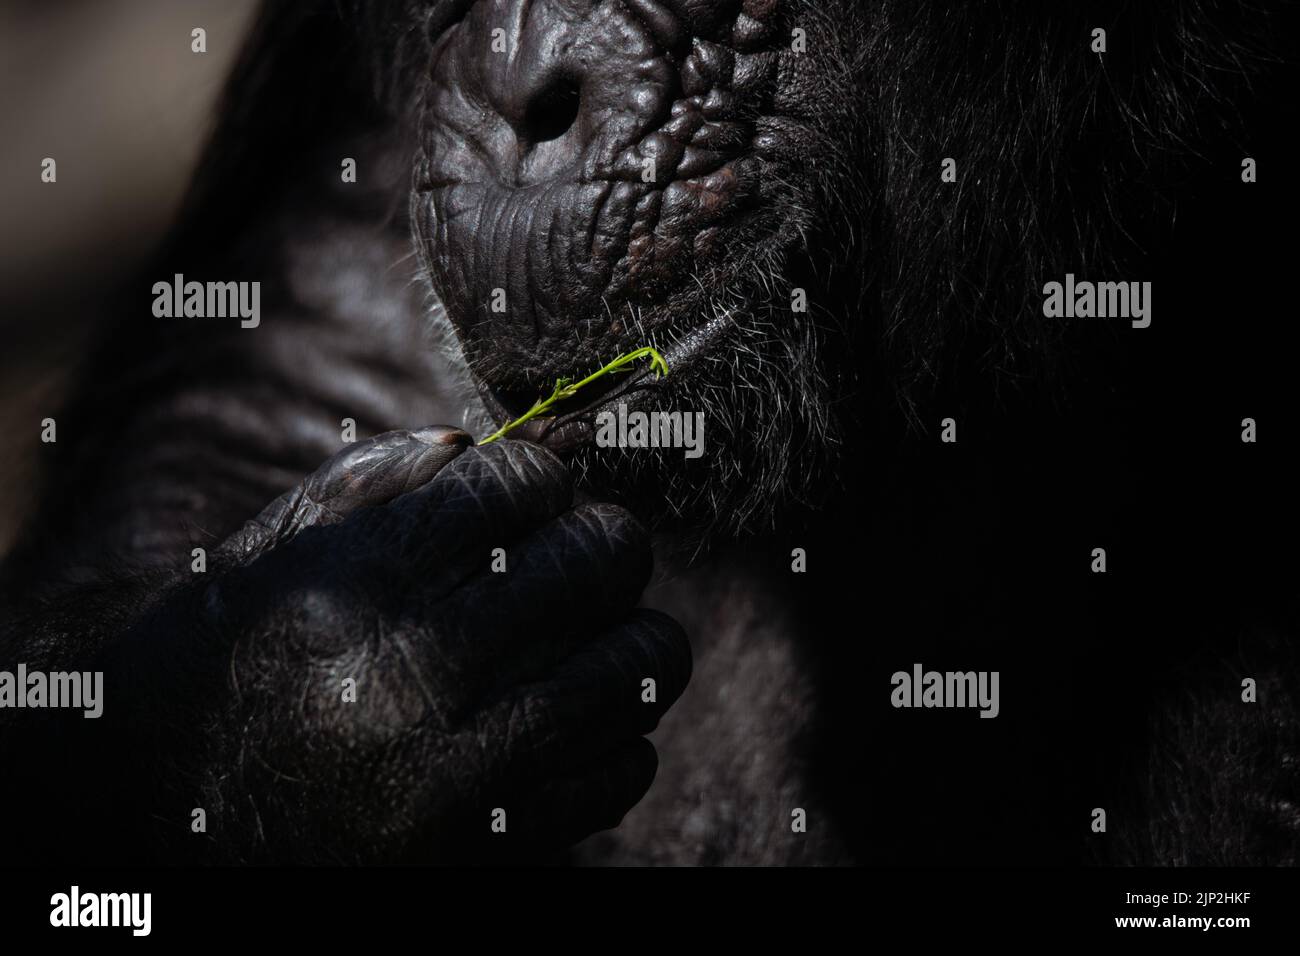 Detail of the hands and the mouth of a chimpanzee eating a leaf in the dark Stock Photo